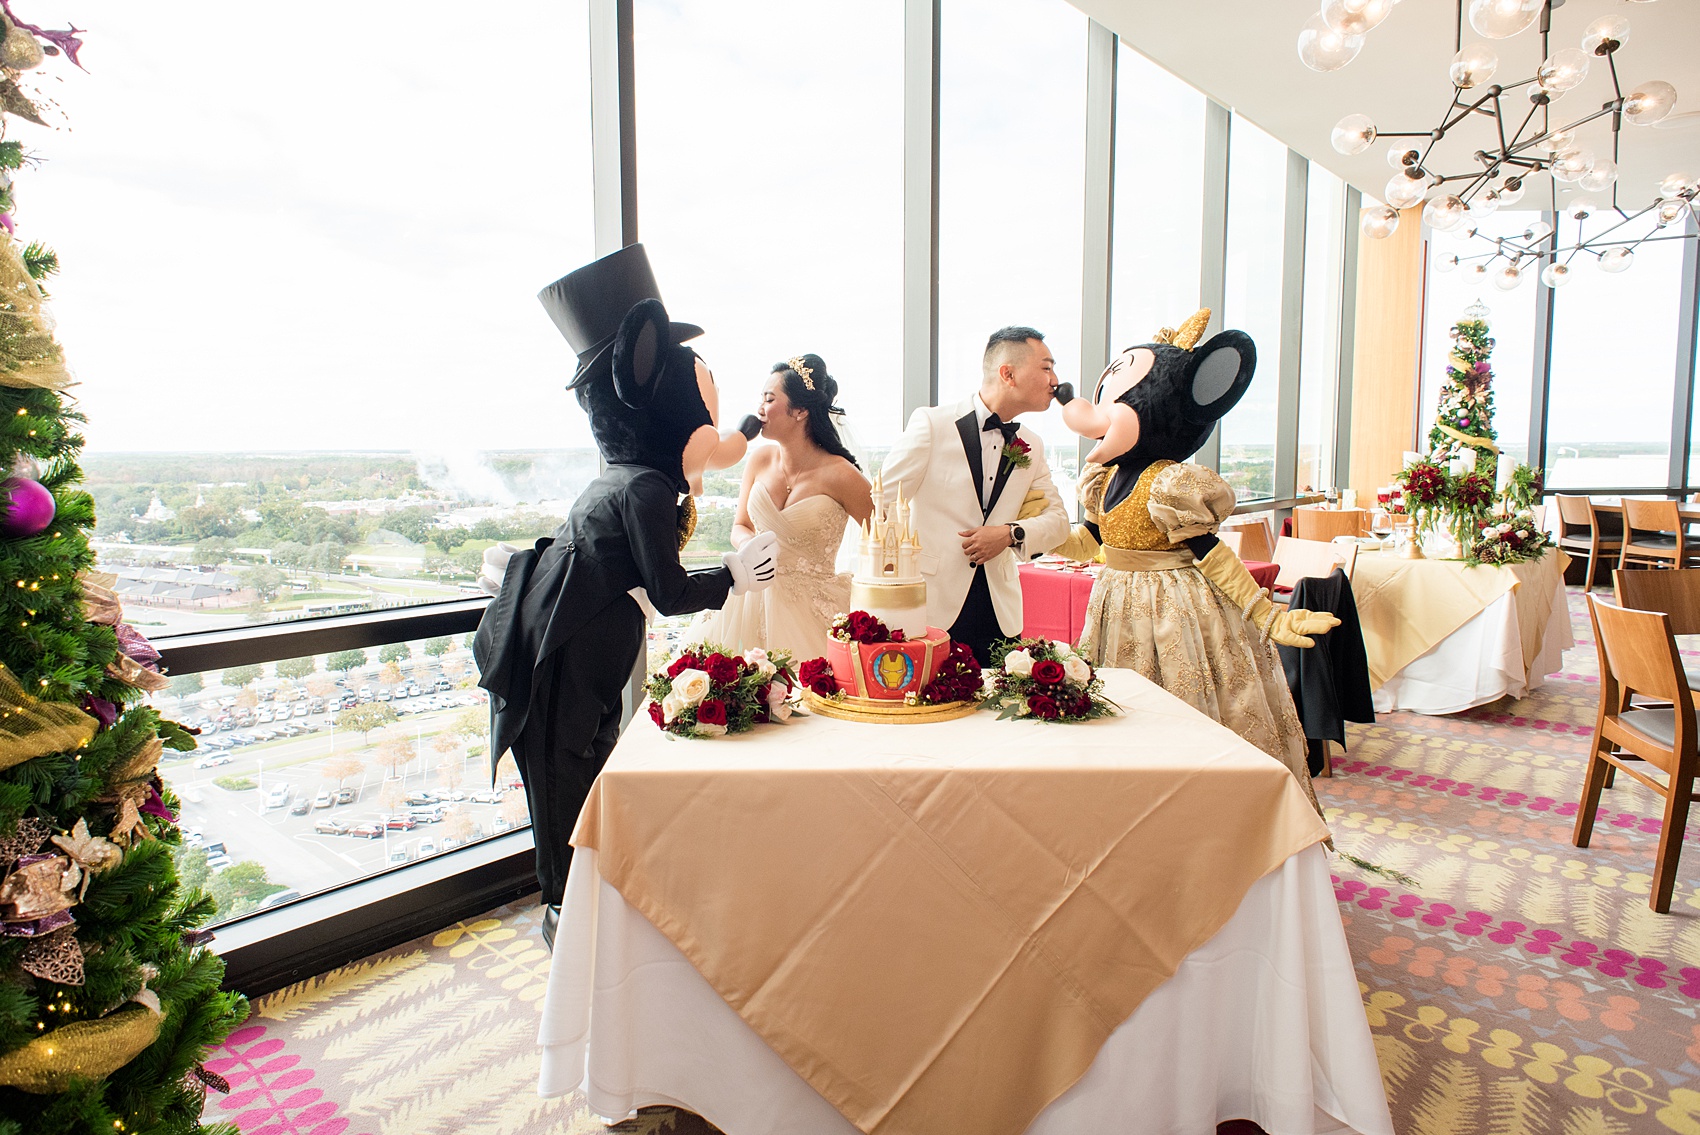 Photographs of a Walt Disney World wedding by Mikkel Paige Photography. The bride and groom had cake cutting help from Mickey Mouse and Minnie Mouse in formal attire! Their reception venue at The Contemporary Resort’s California Grill was great for fun, awesome photos with them. It overlooked the Magic Kingdom Park and Cinderella Castle! Their small, dream day included red rose details and a Beauty and the Beast theme. #disneywedding #DisneyWorldWedding #BeautyandtheBeast #MickeyandMinnie